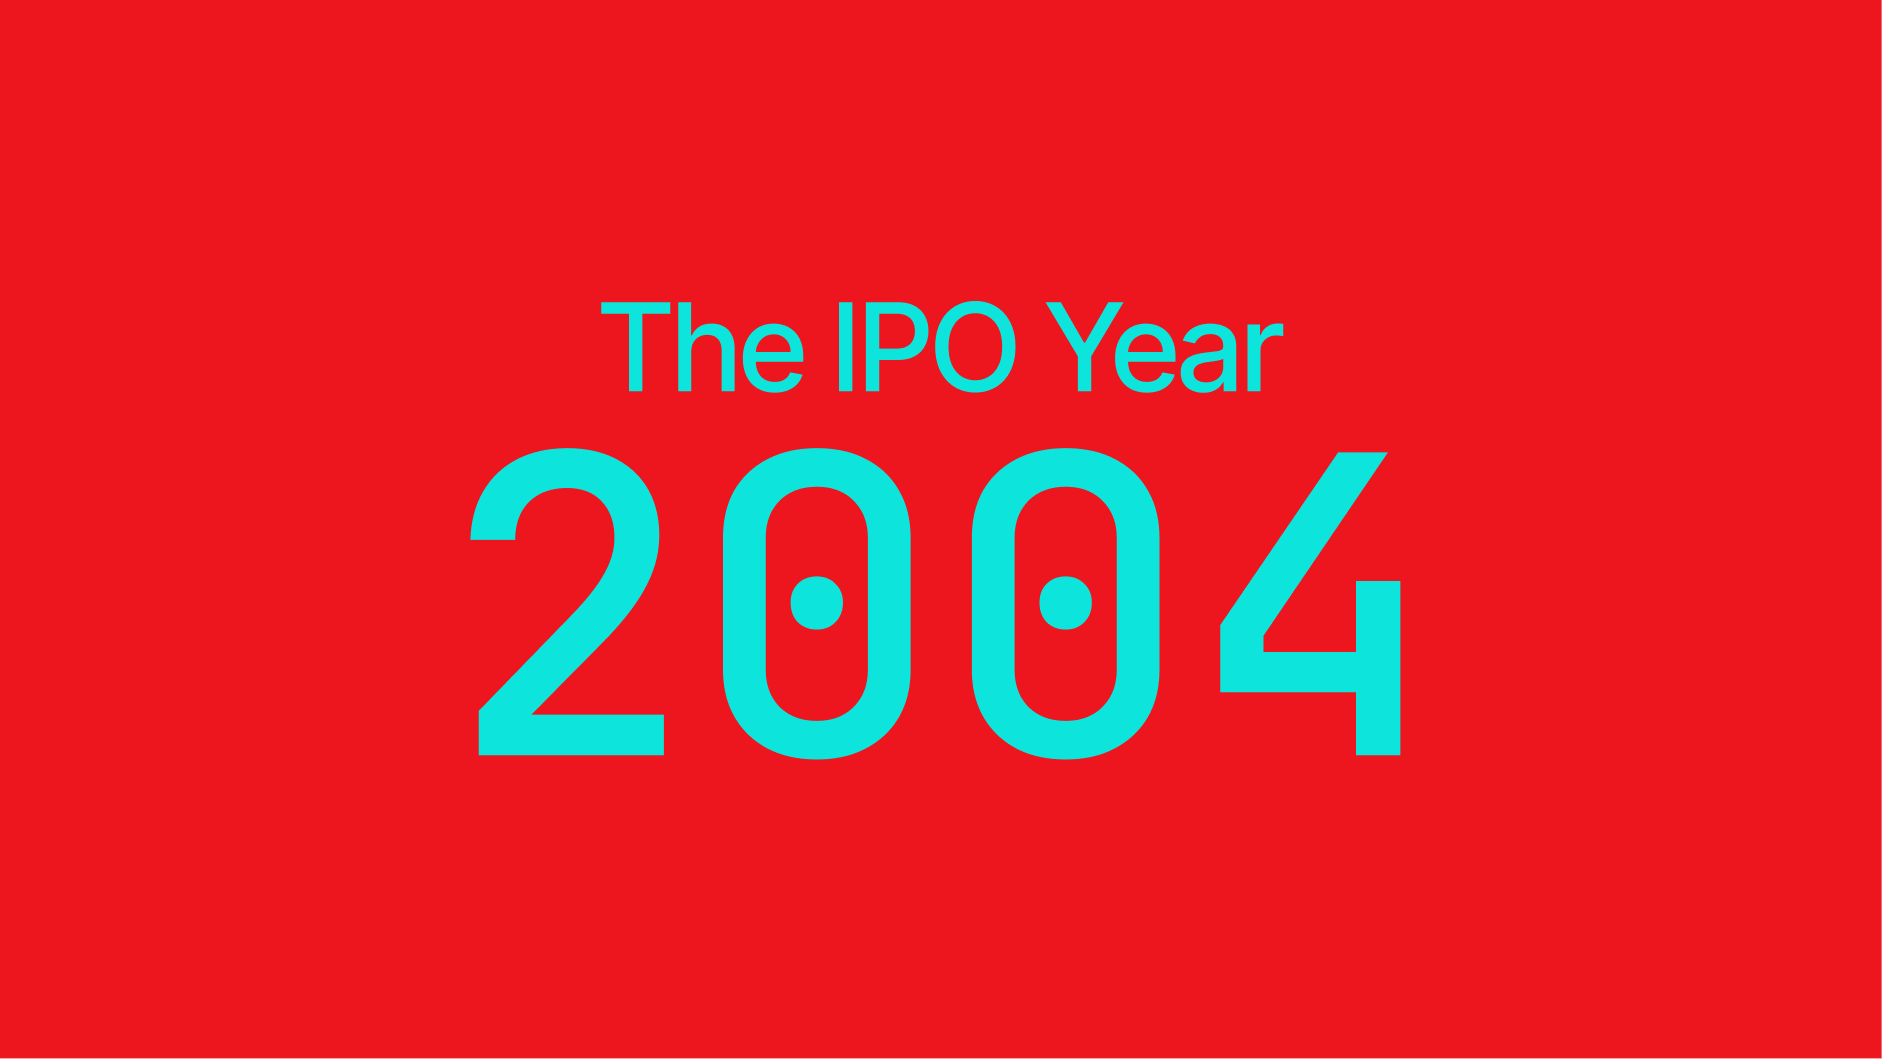 Initial Public Offerings - IPOs in 2004